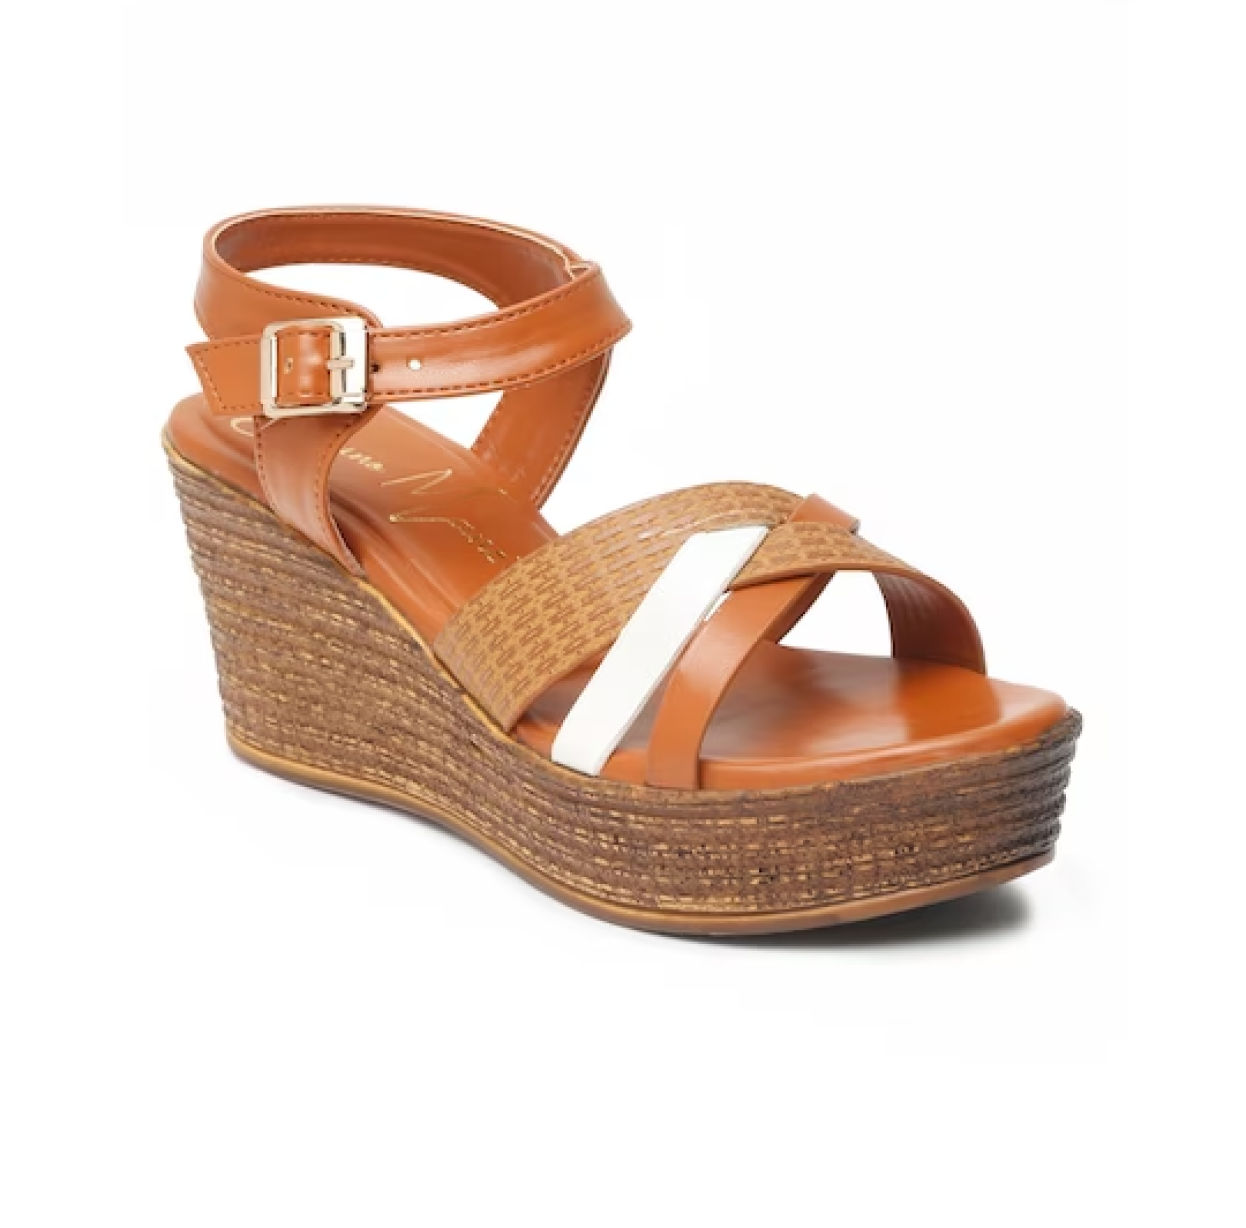 Textured Open Toe Wedges With Ankle Loop